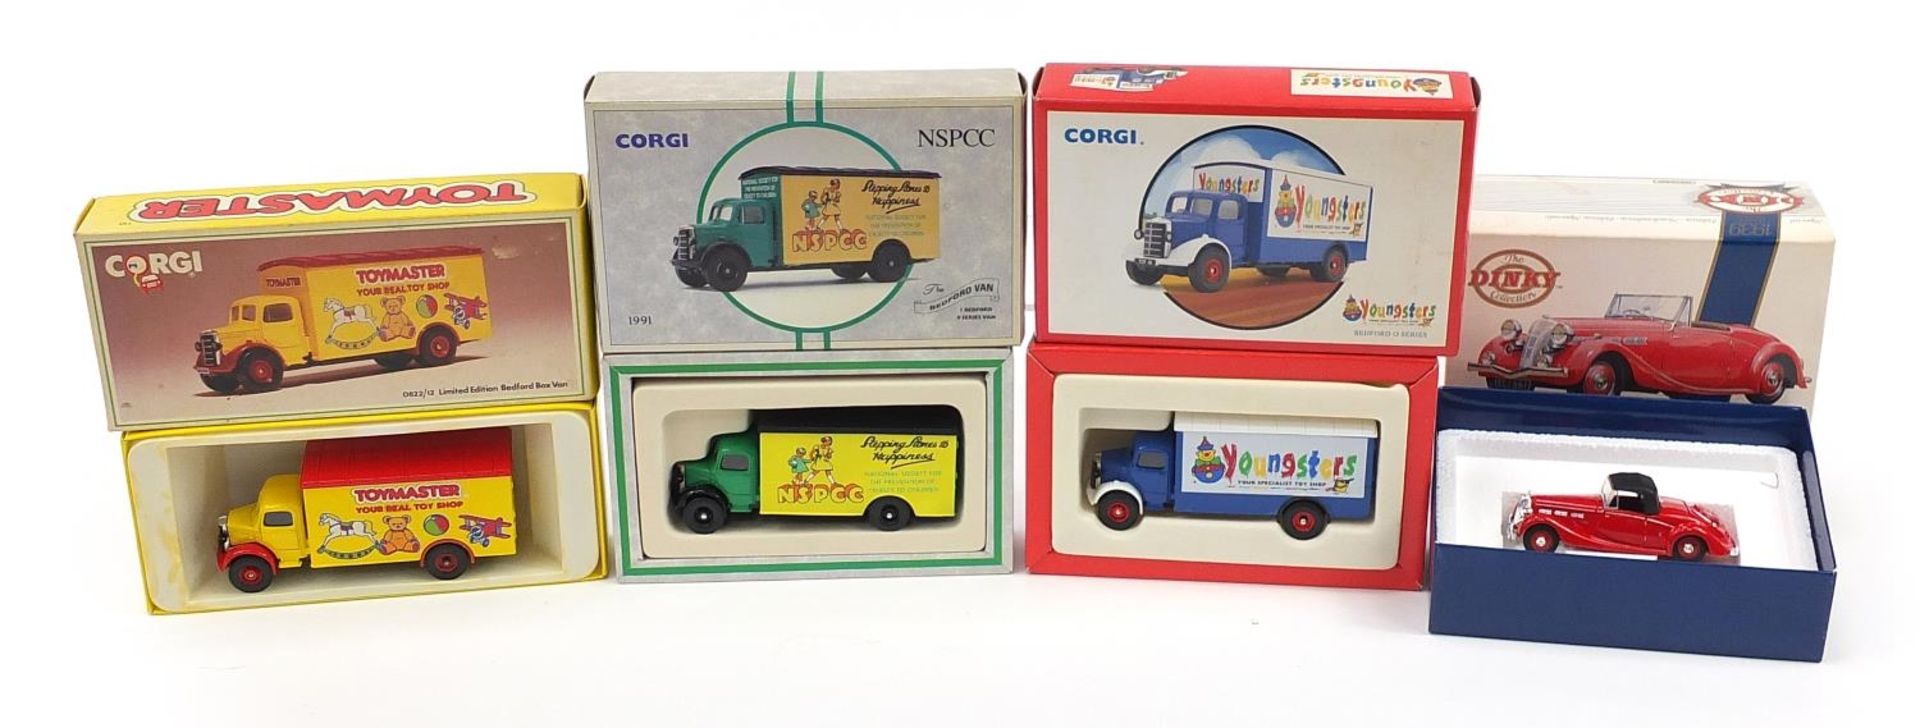 Four Corgi and Dinky diecast vehicles with boxes comprising 1939 Triumph Dolomite, NSPCC Bedford